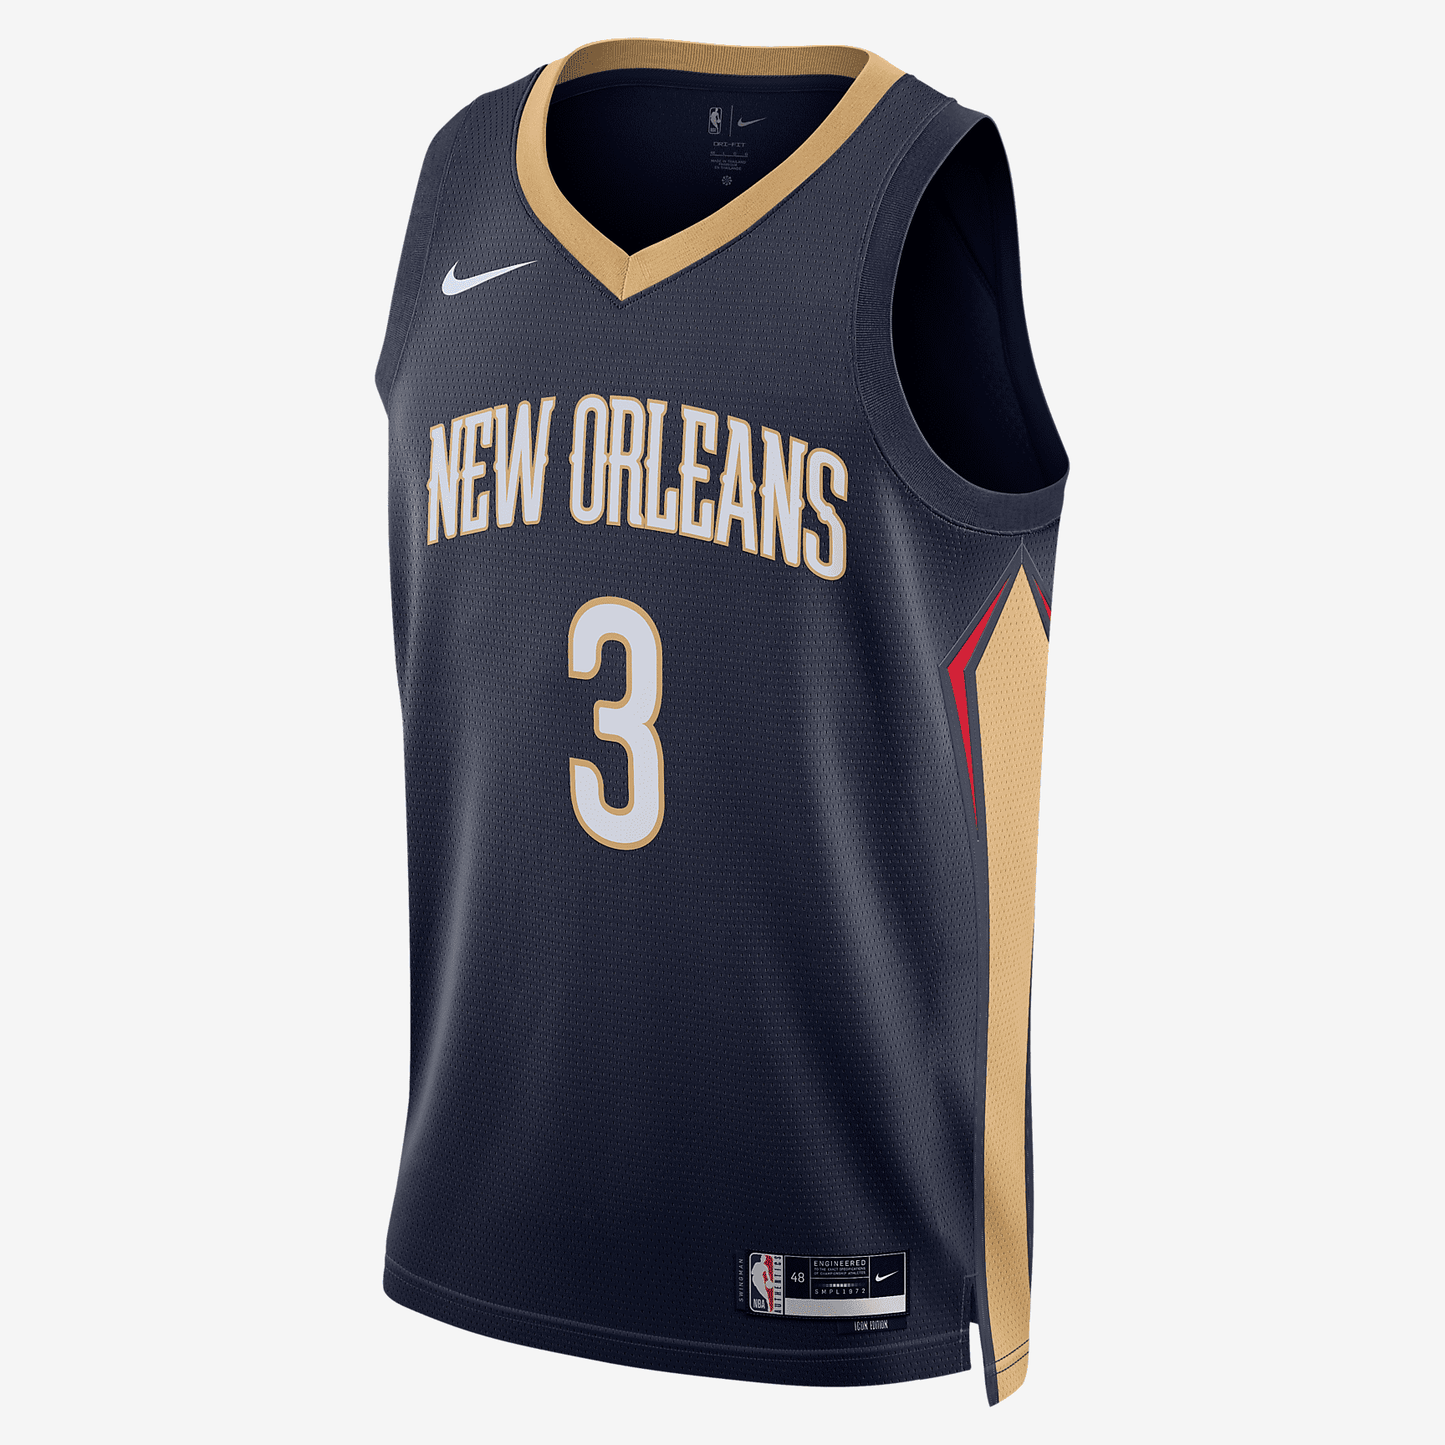 New Orleans Pelicans Icon Edition 2022/23 Nike Dri-FIT NBA Swingman Jersey - College Navy